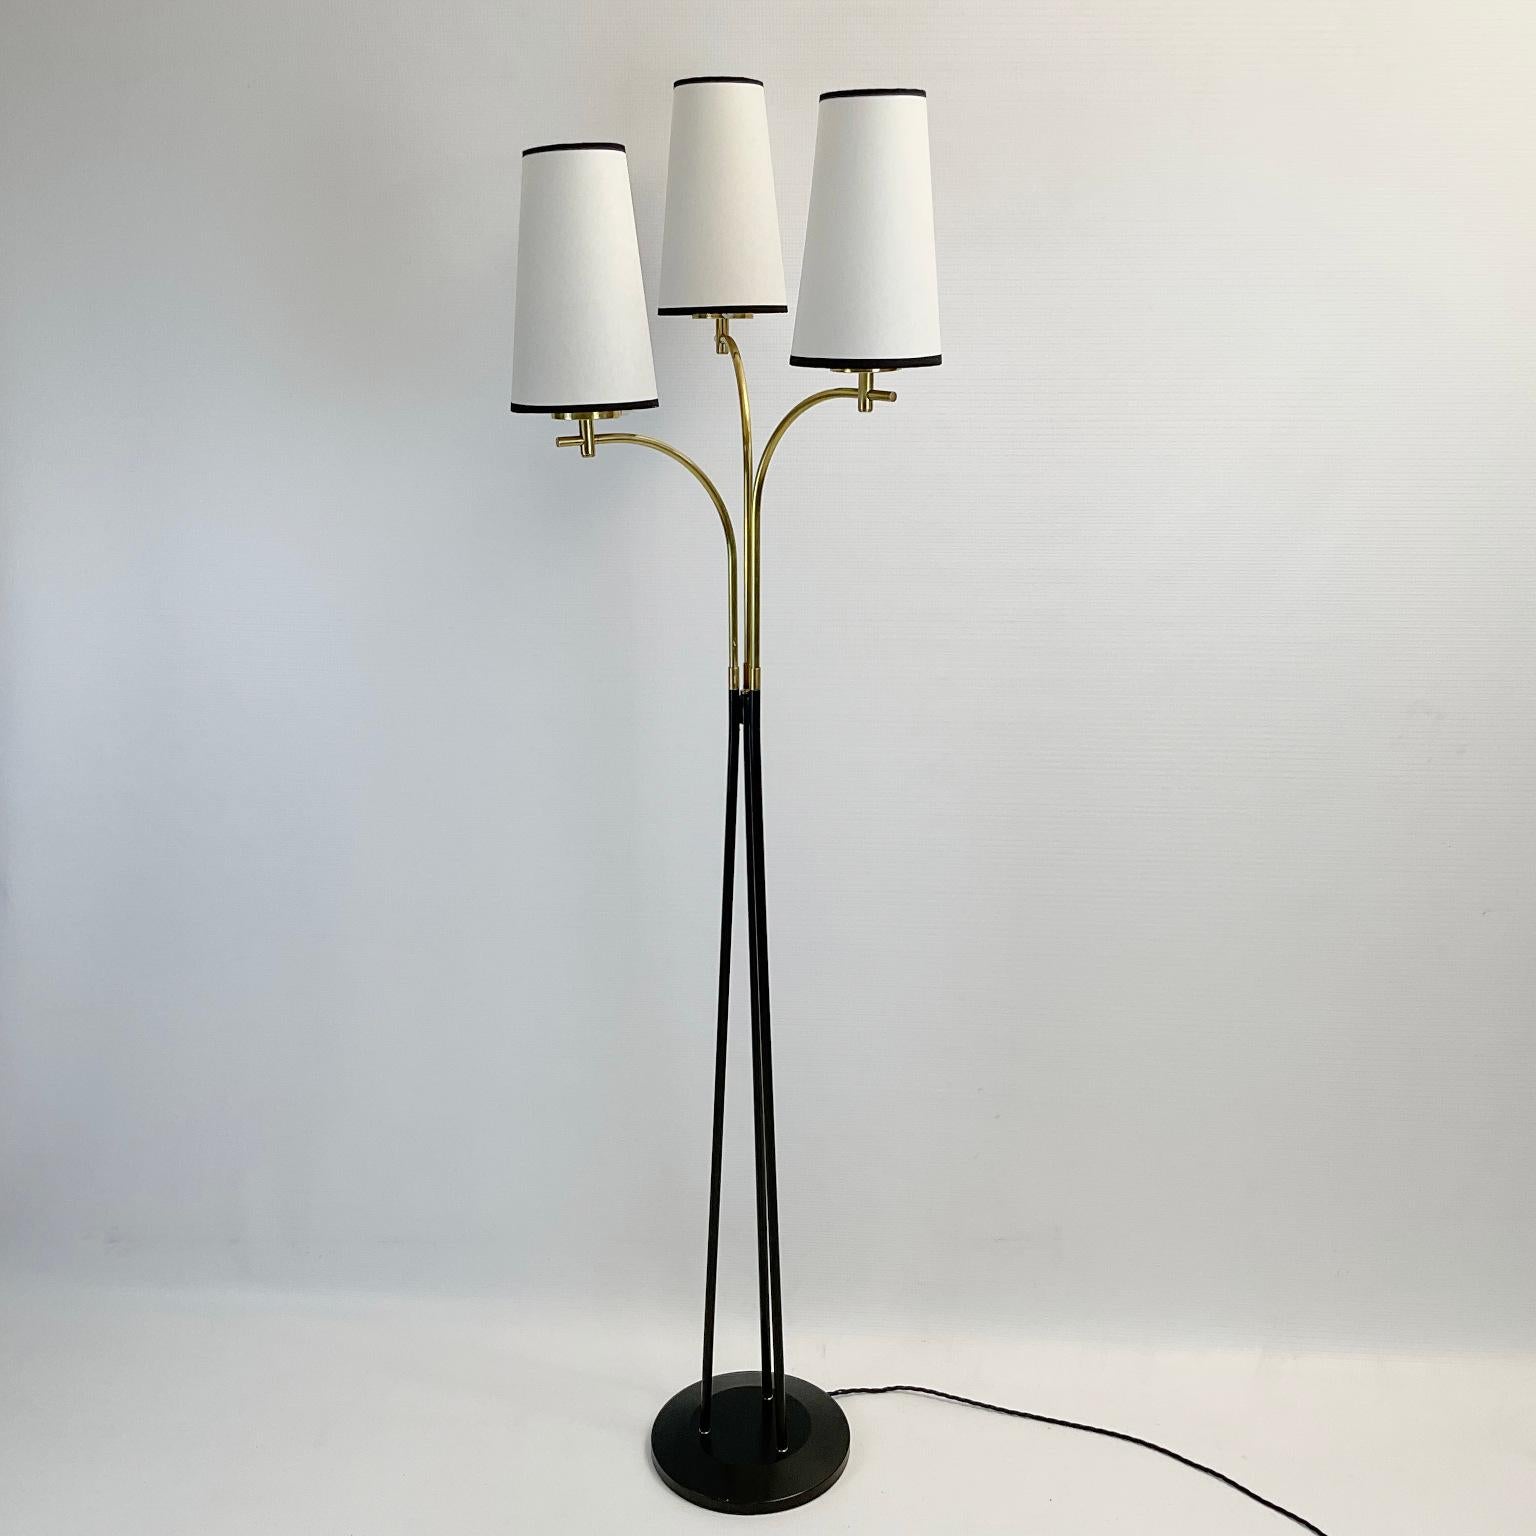 1950s floor lamp attributed to Maison Lunel France.
The circular base is painted black with a polished brass arm finish.
Each of the arms is topped with a parchment shade with a black trim ribbon.
At the base of each lampshade holder, there is a